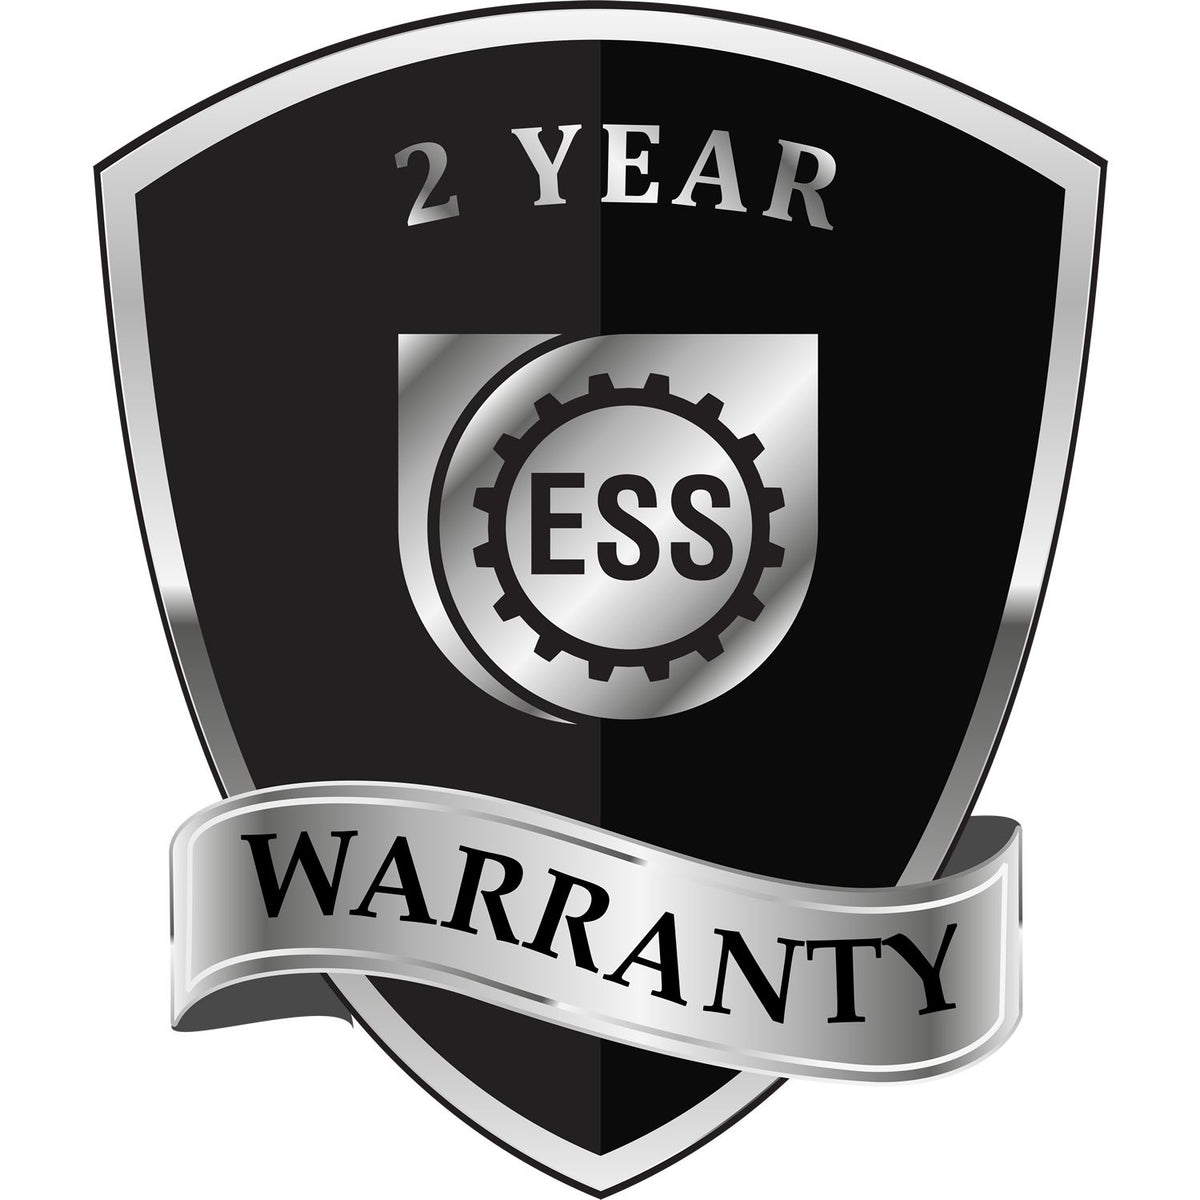 A badge or emblem showing a warranty icon for the Nevada Engineer Desk Seal